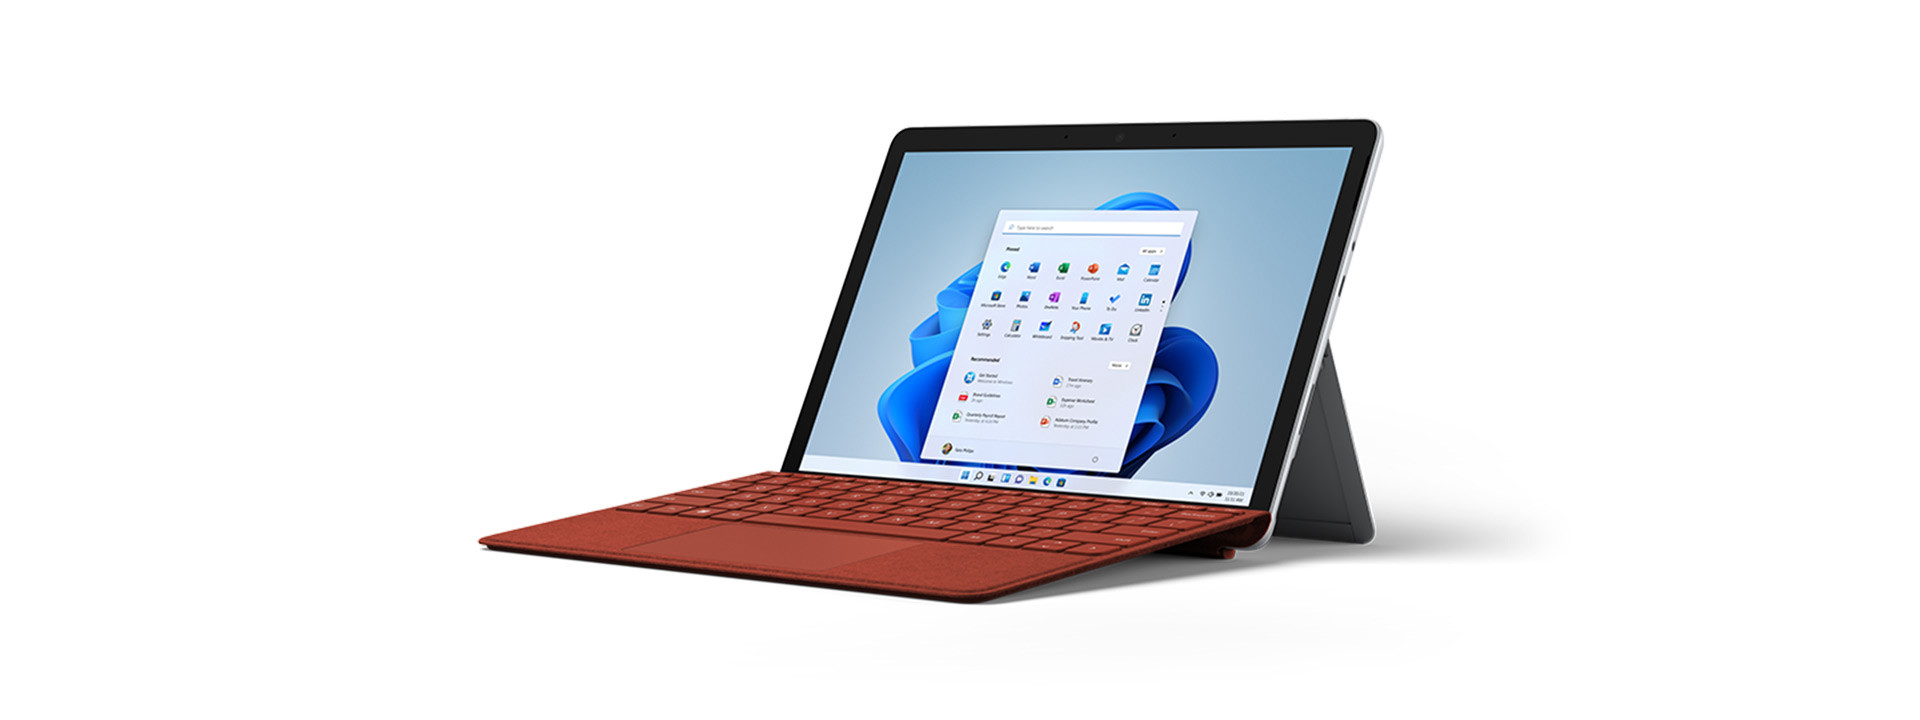 Surface Go 3 - Most portable 2-in-1 tablet & laptop - Microsoft 